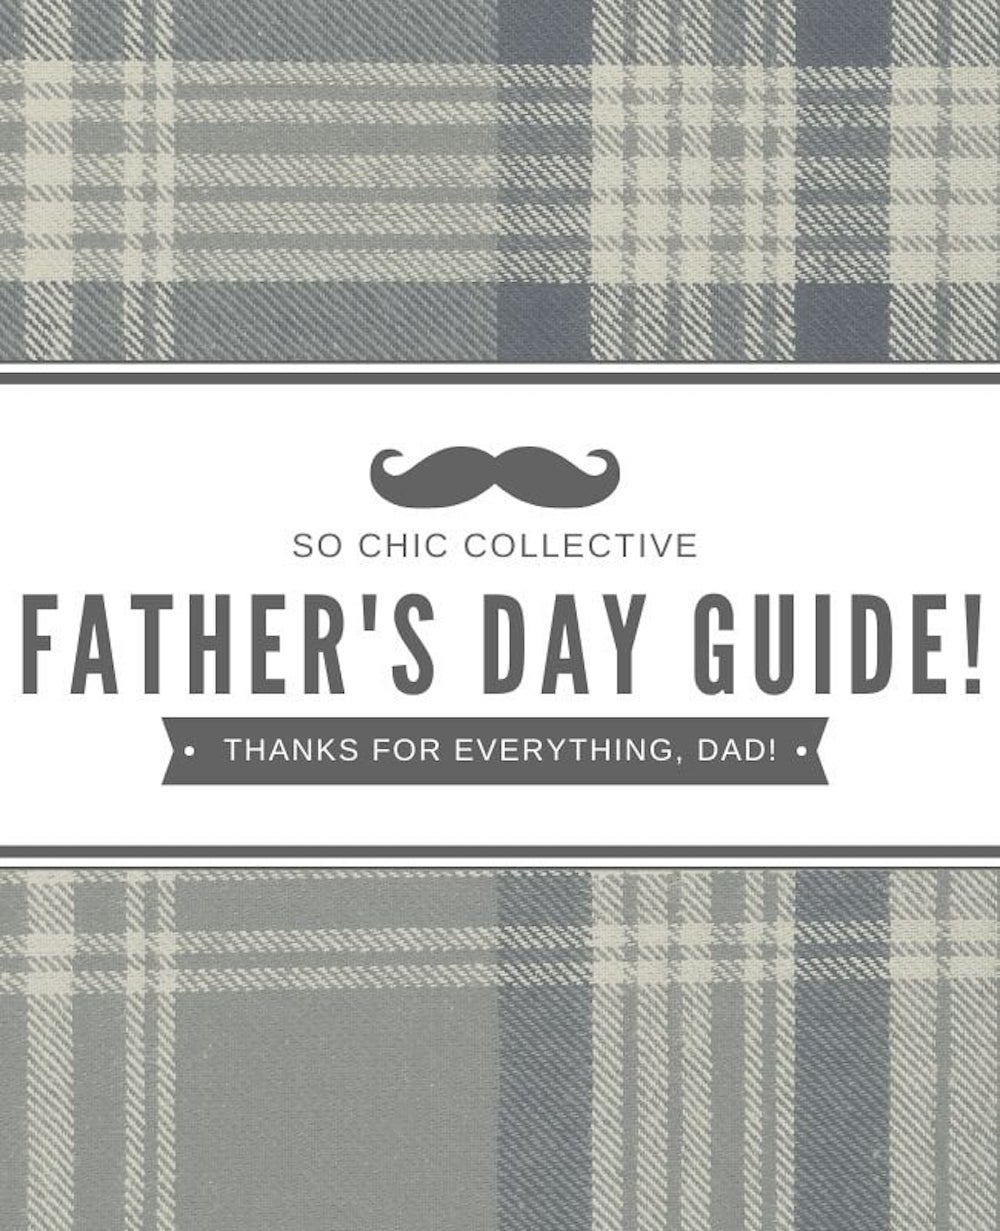 Best Father's Day gift guide